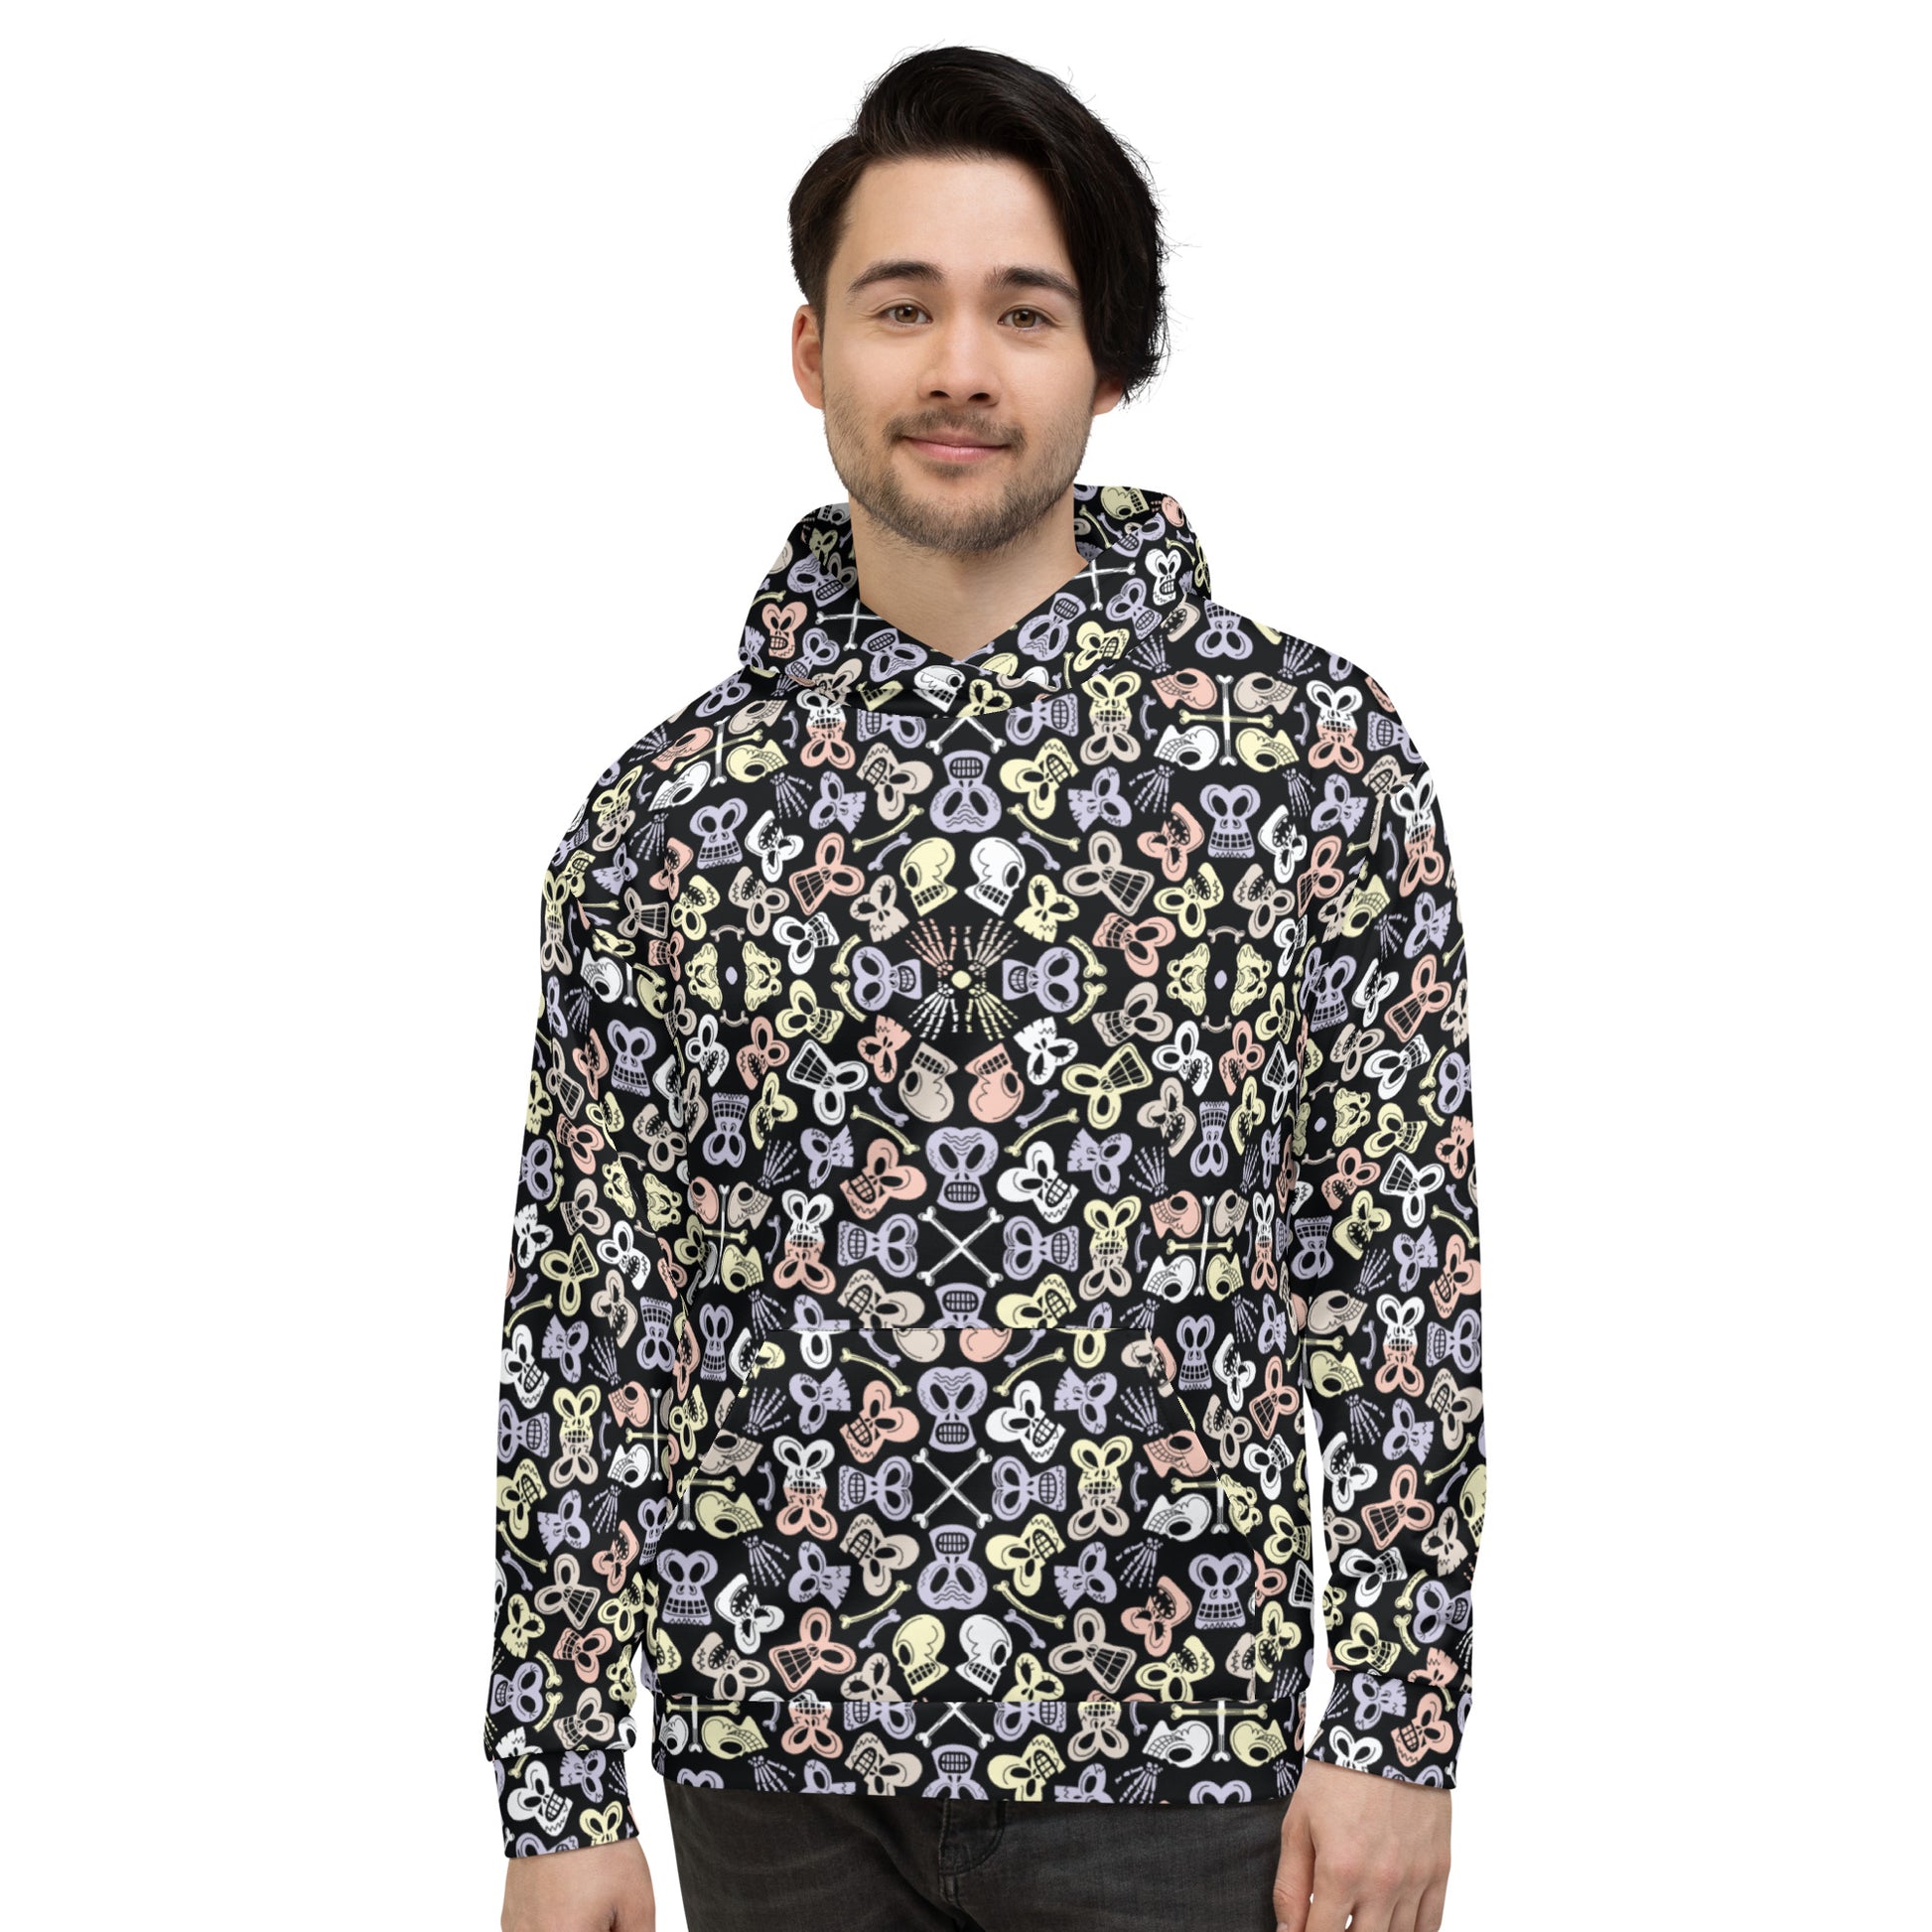 Bewitched Skulls: Hauntingly Chic Pattern Design - Unisex Hoodie. Front view